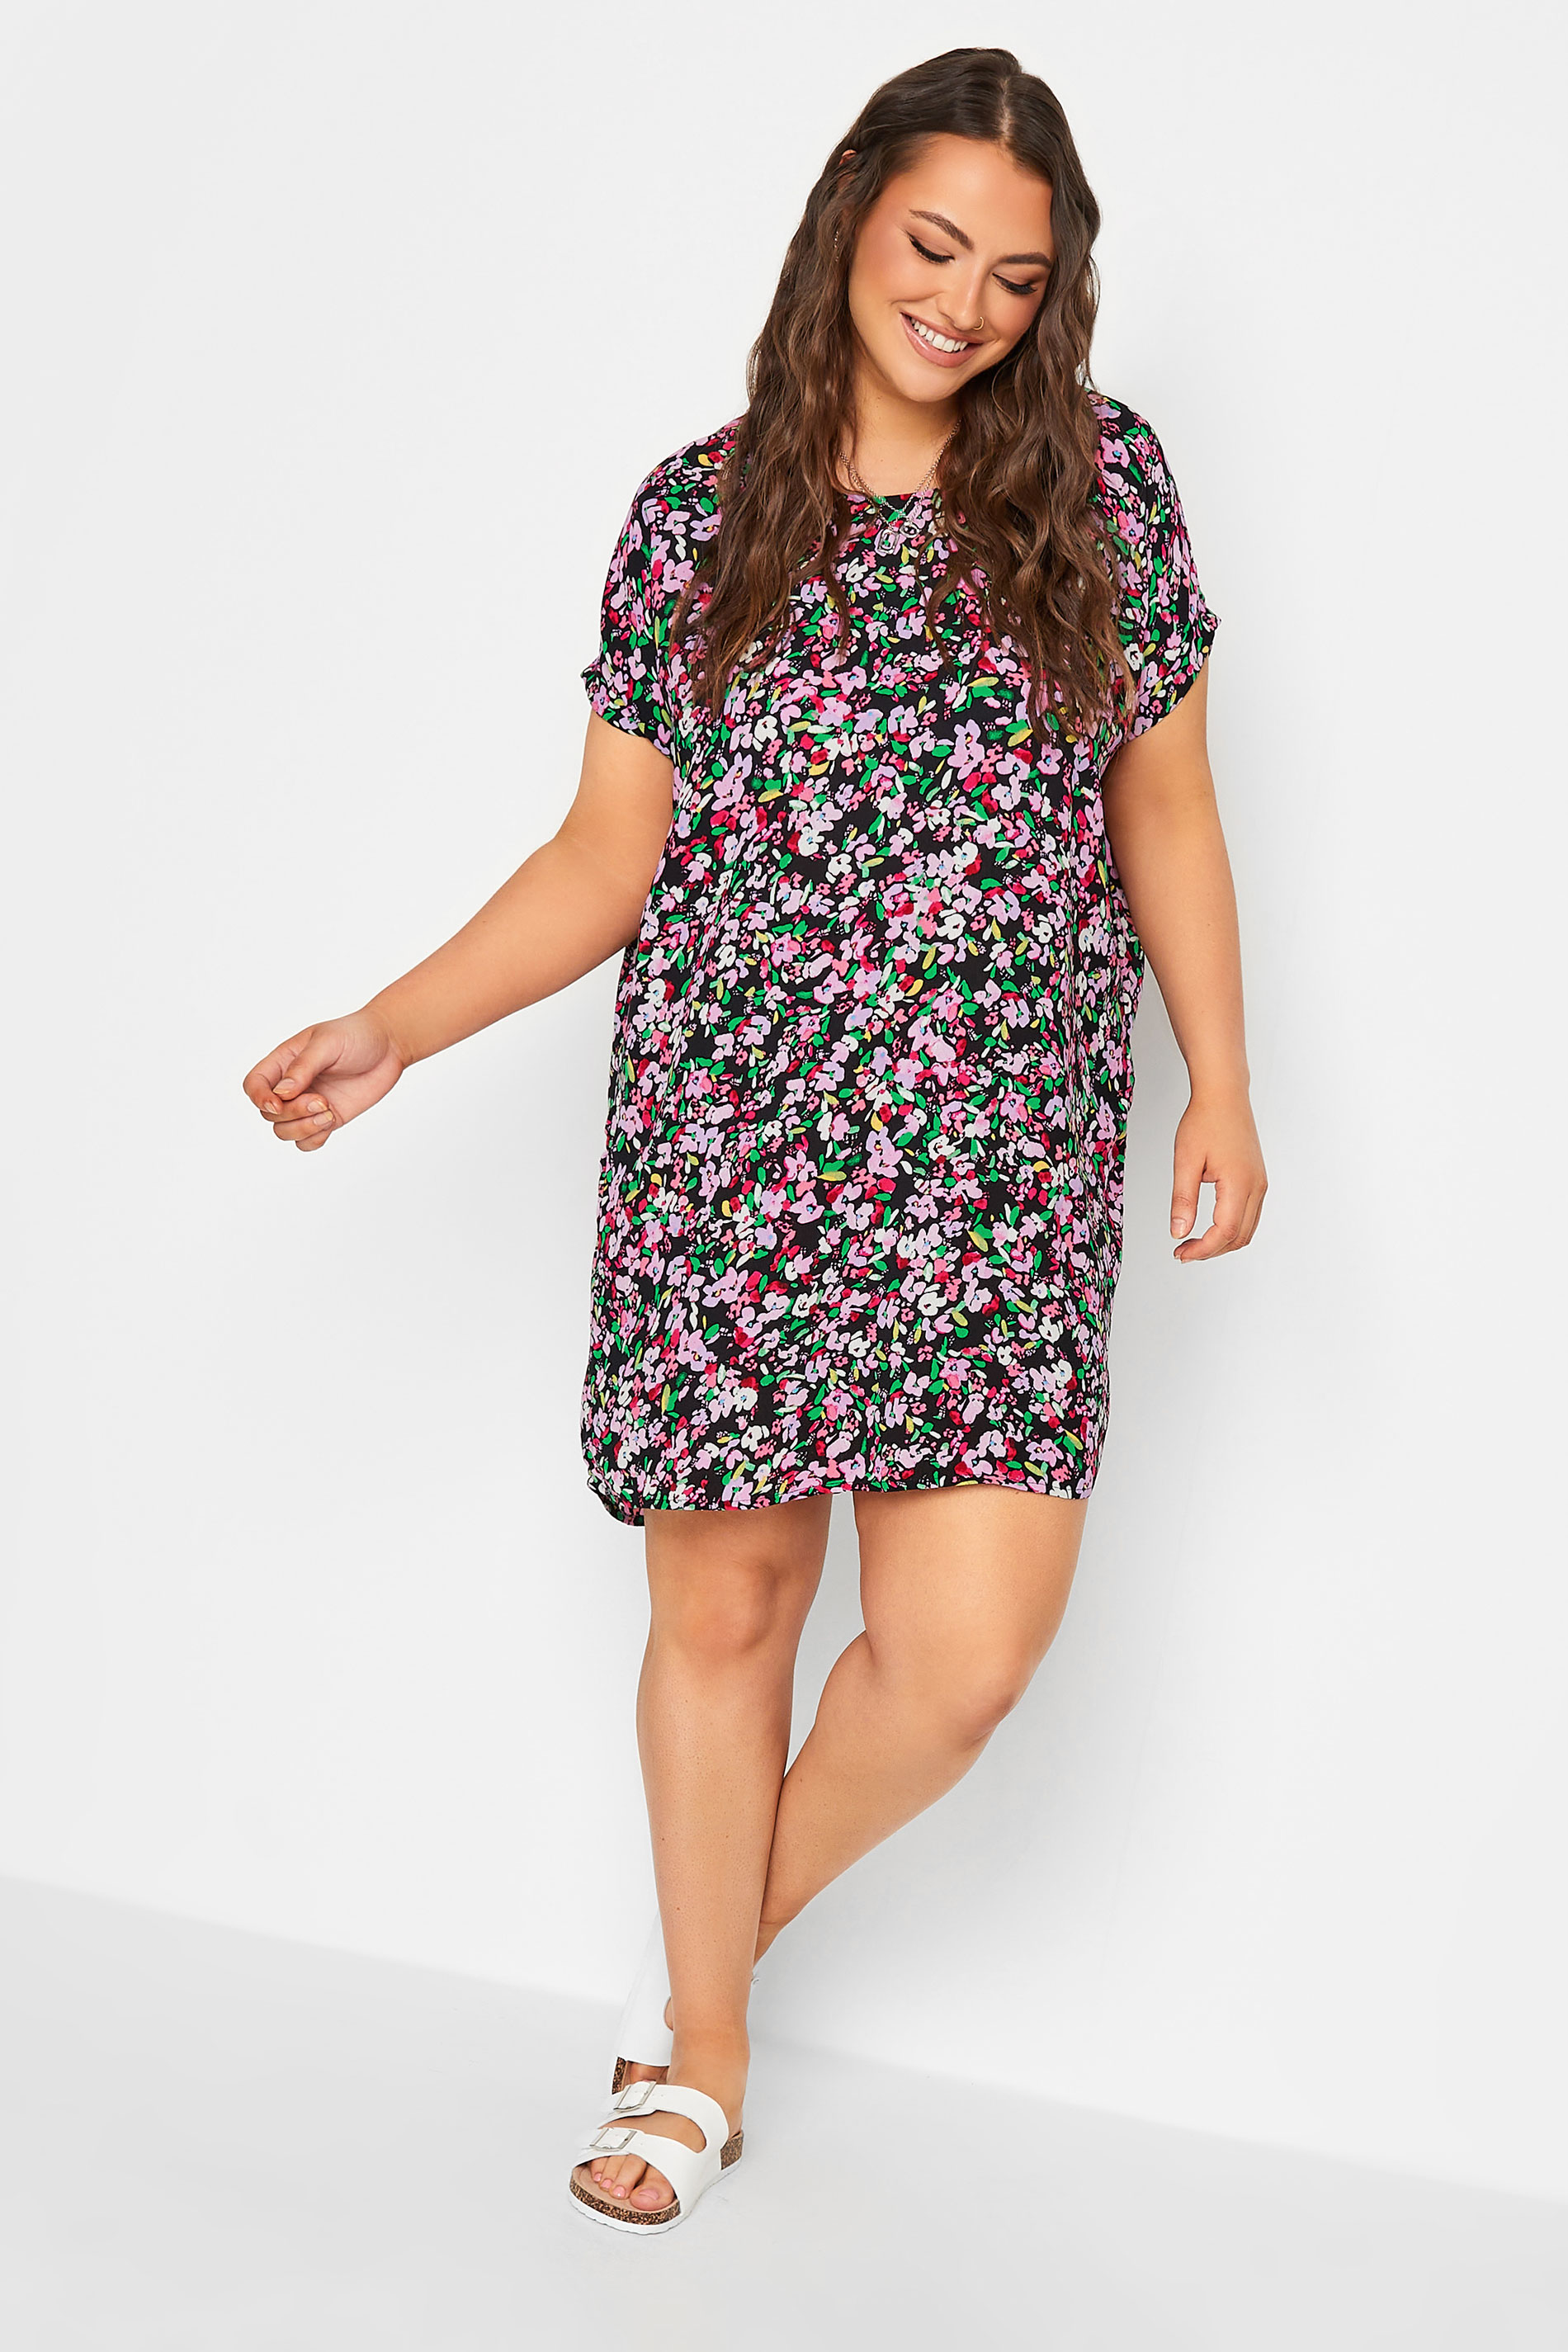 YOURS Plus Size Black & Pink Floral Print Shift Dress | Yours Clothing 1